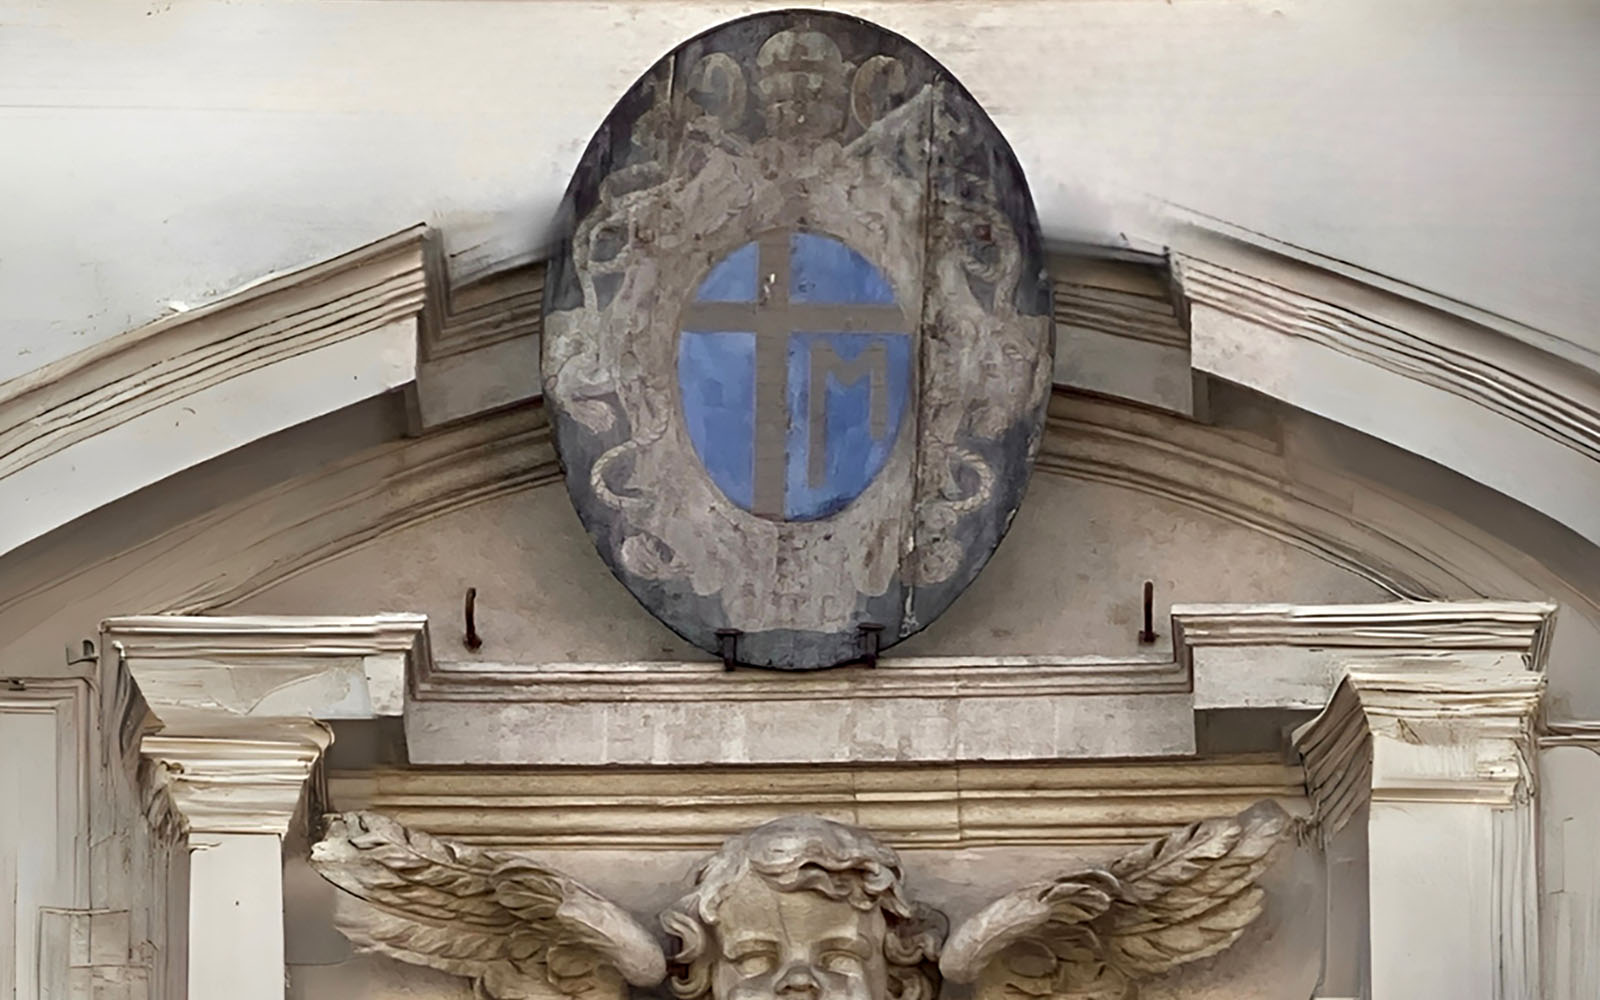 Historic emblem with angel sculpture on building facade.